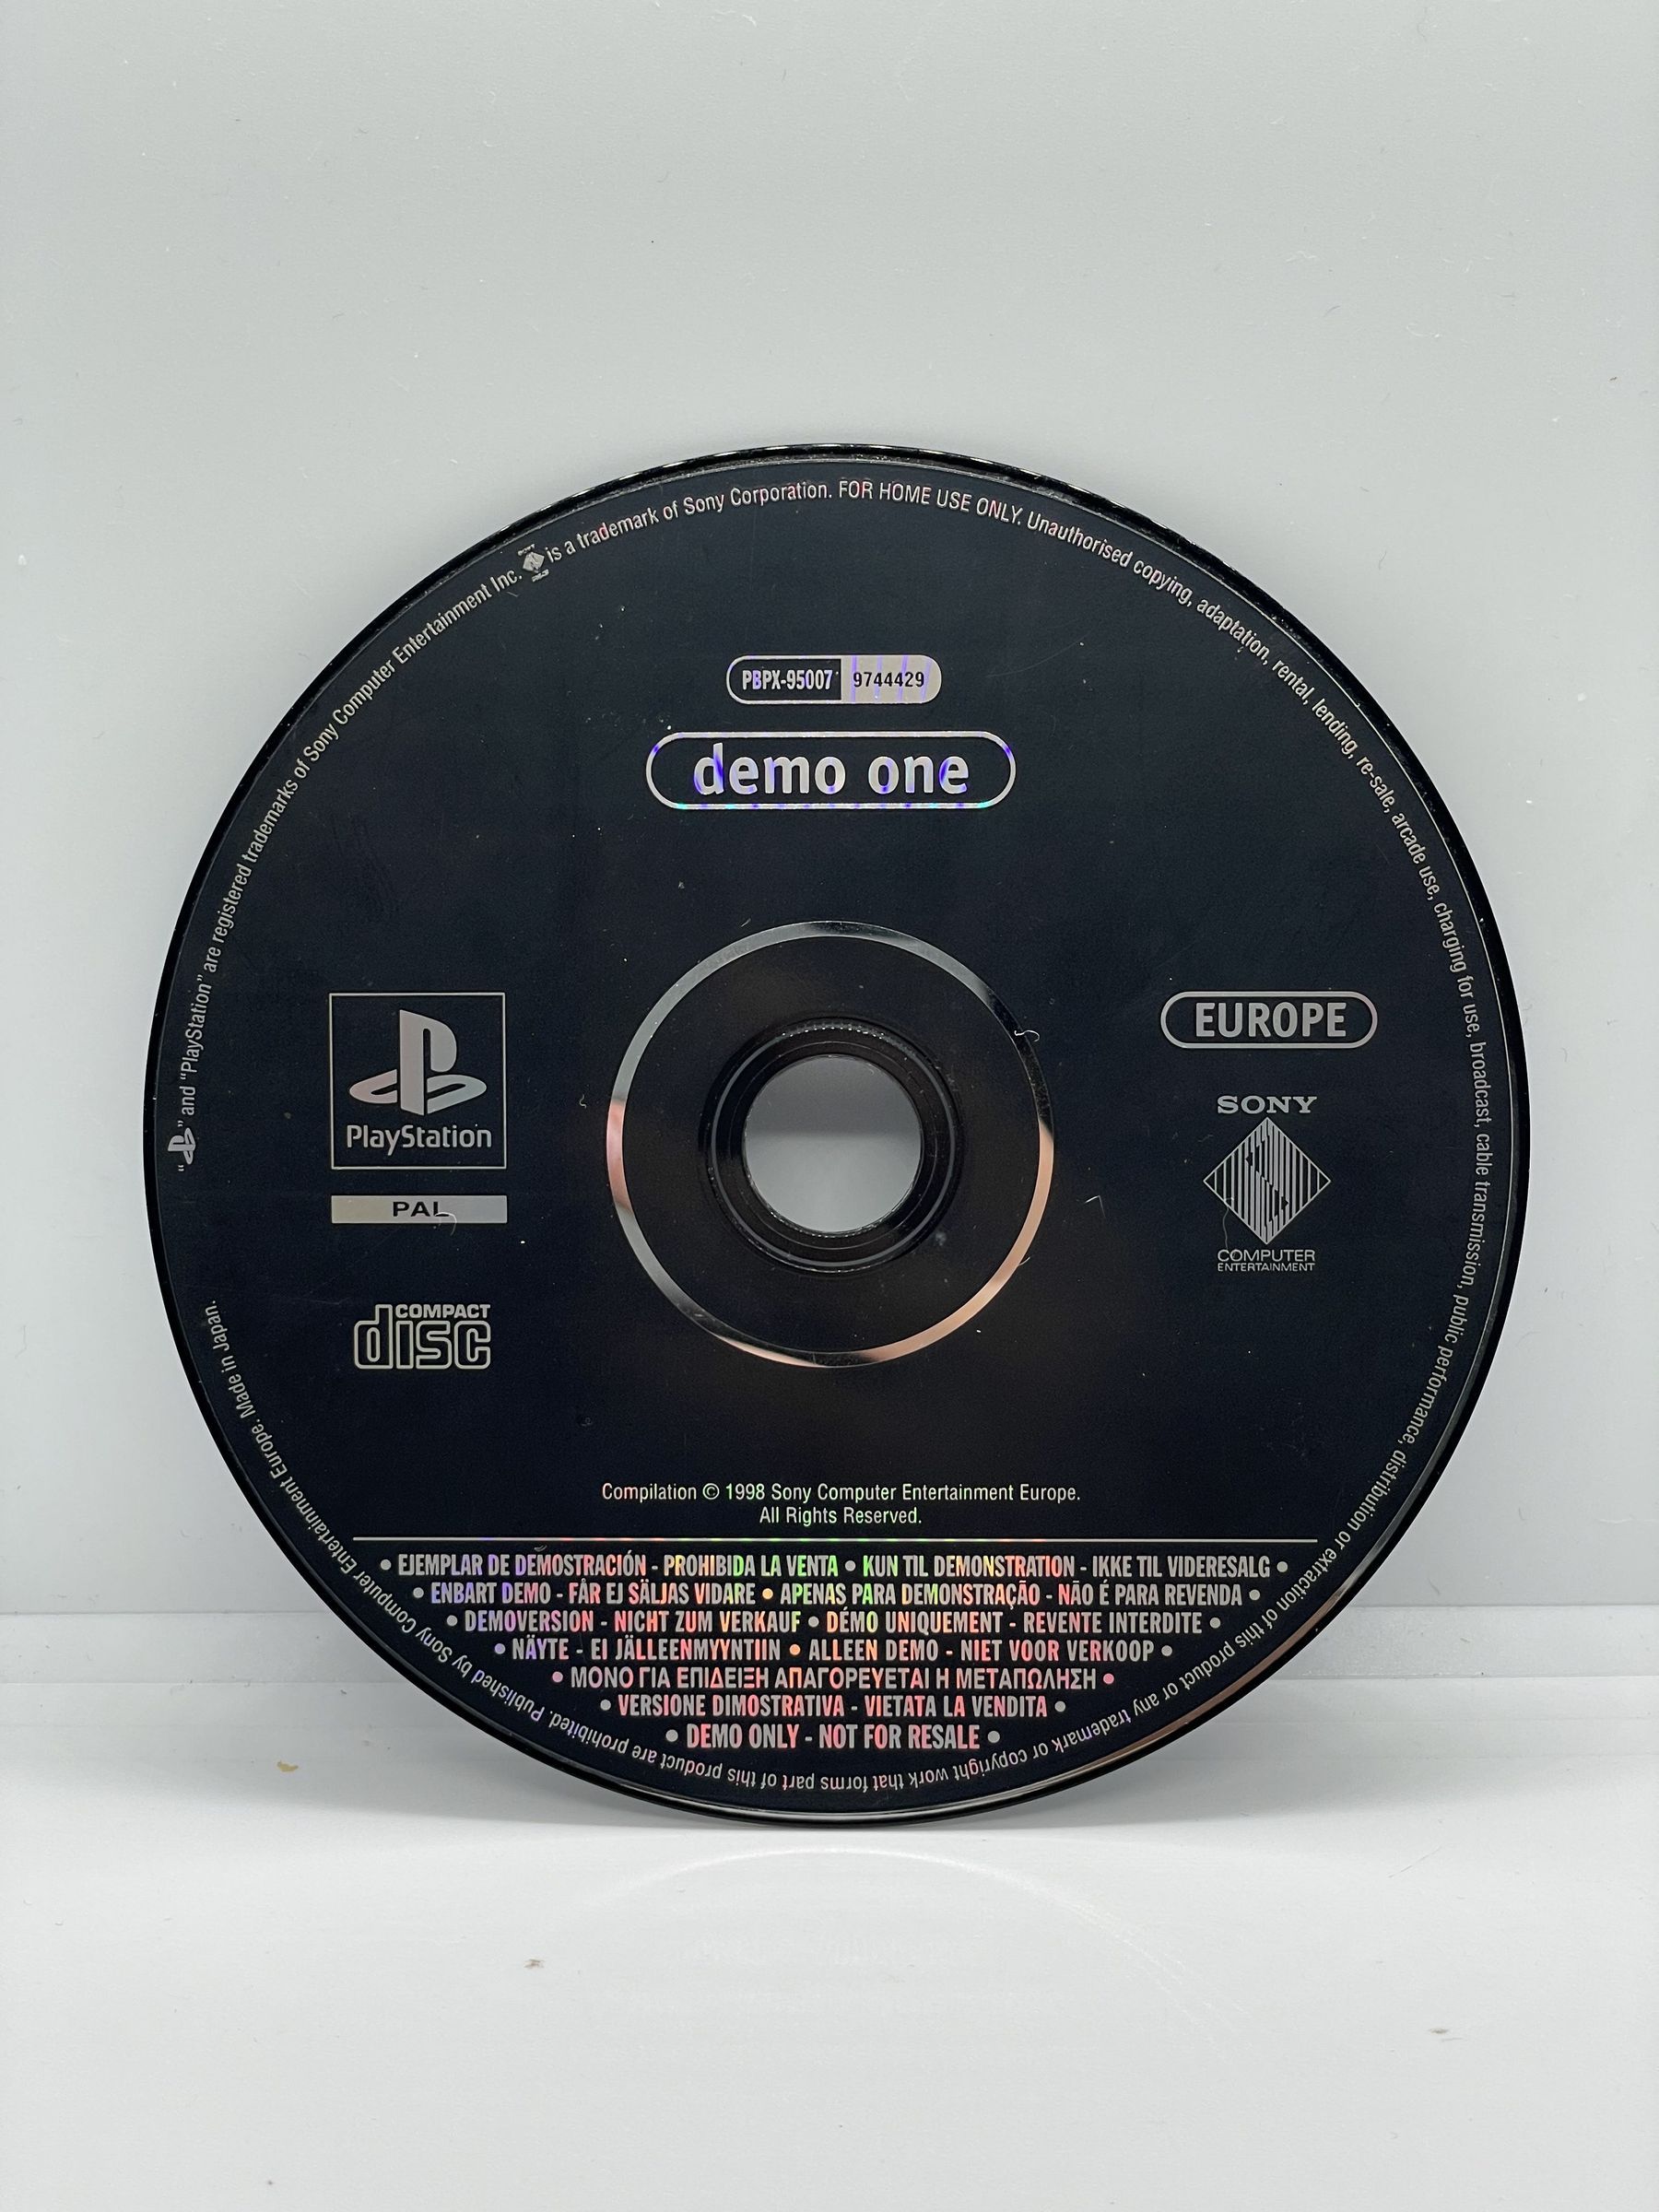 Demo One PS1 (CD) PSX